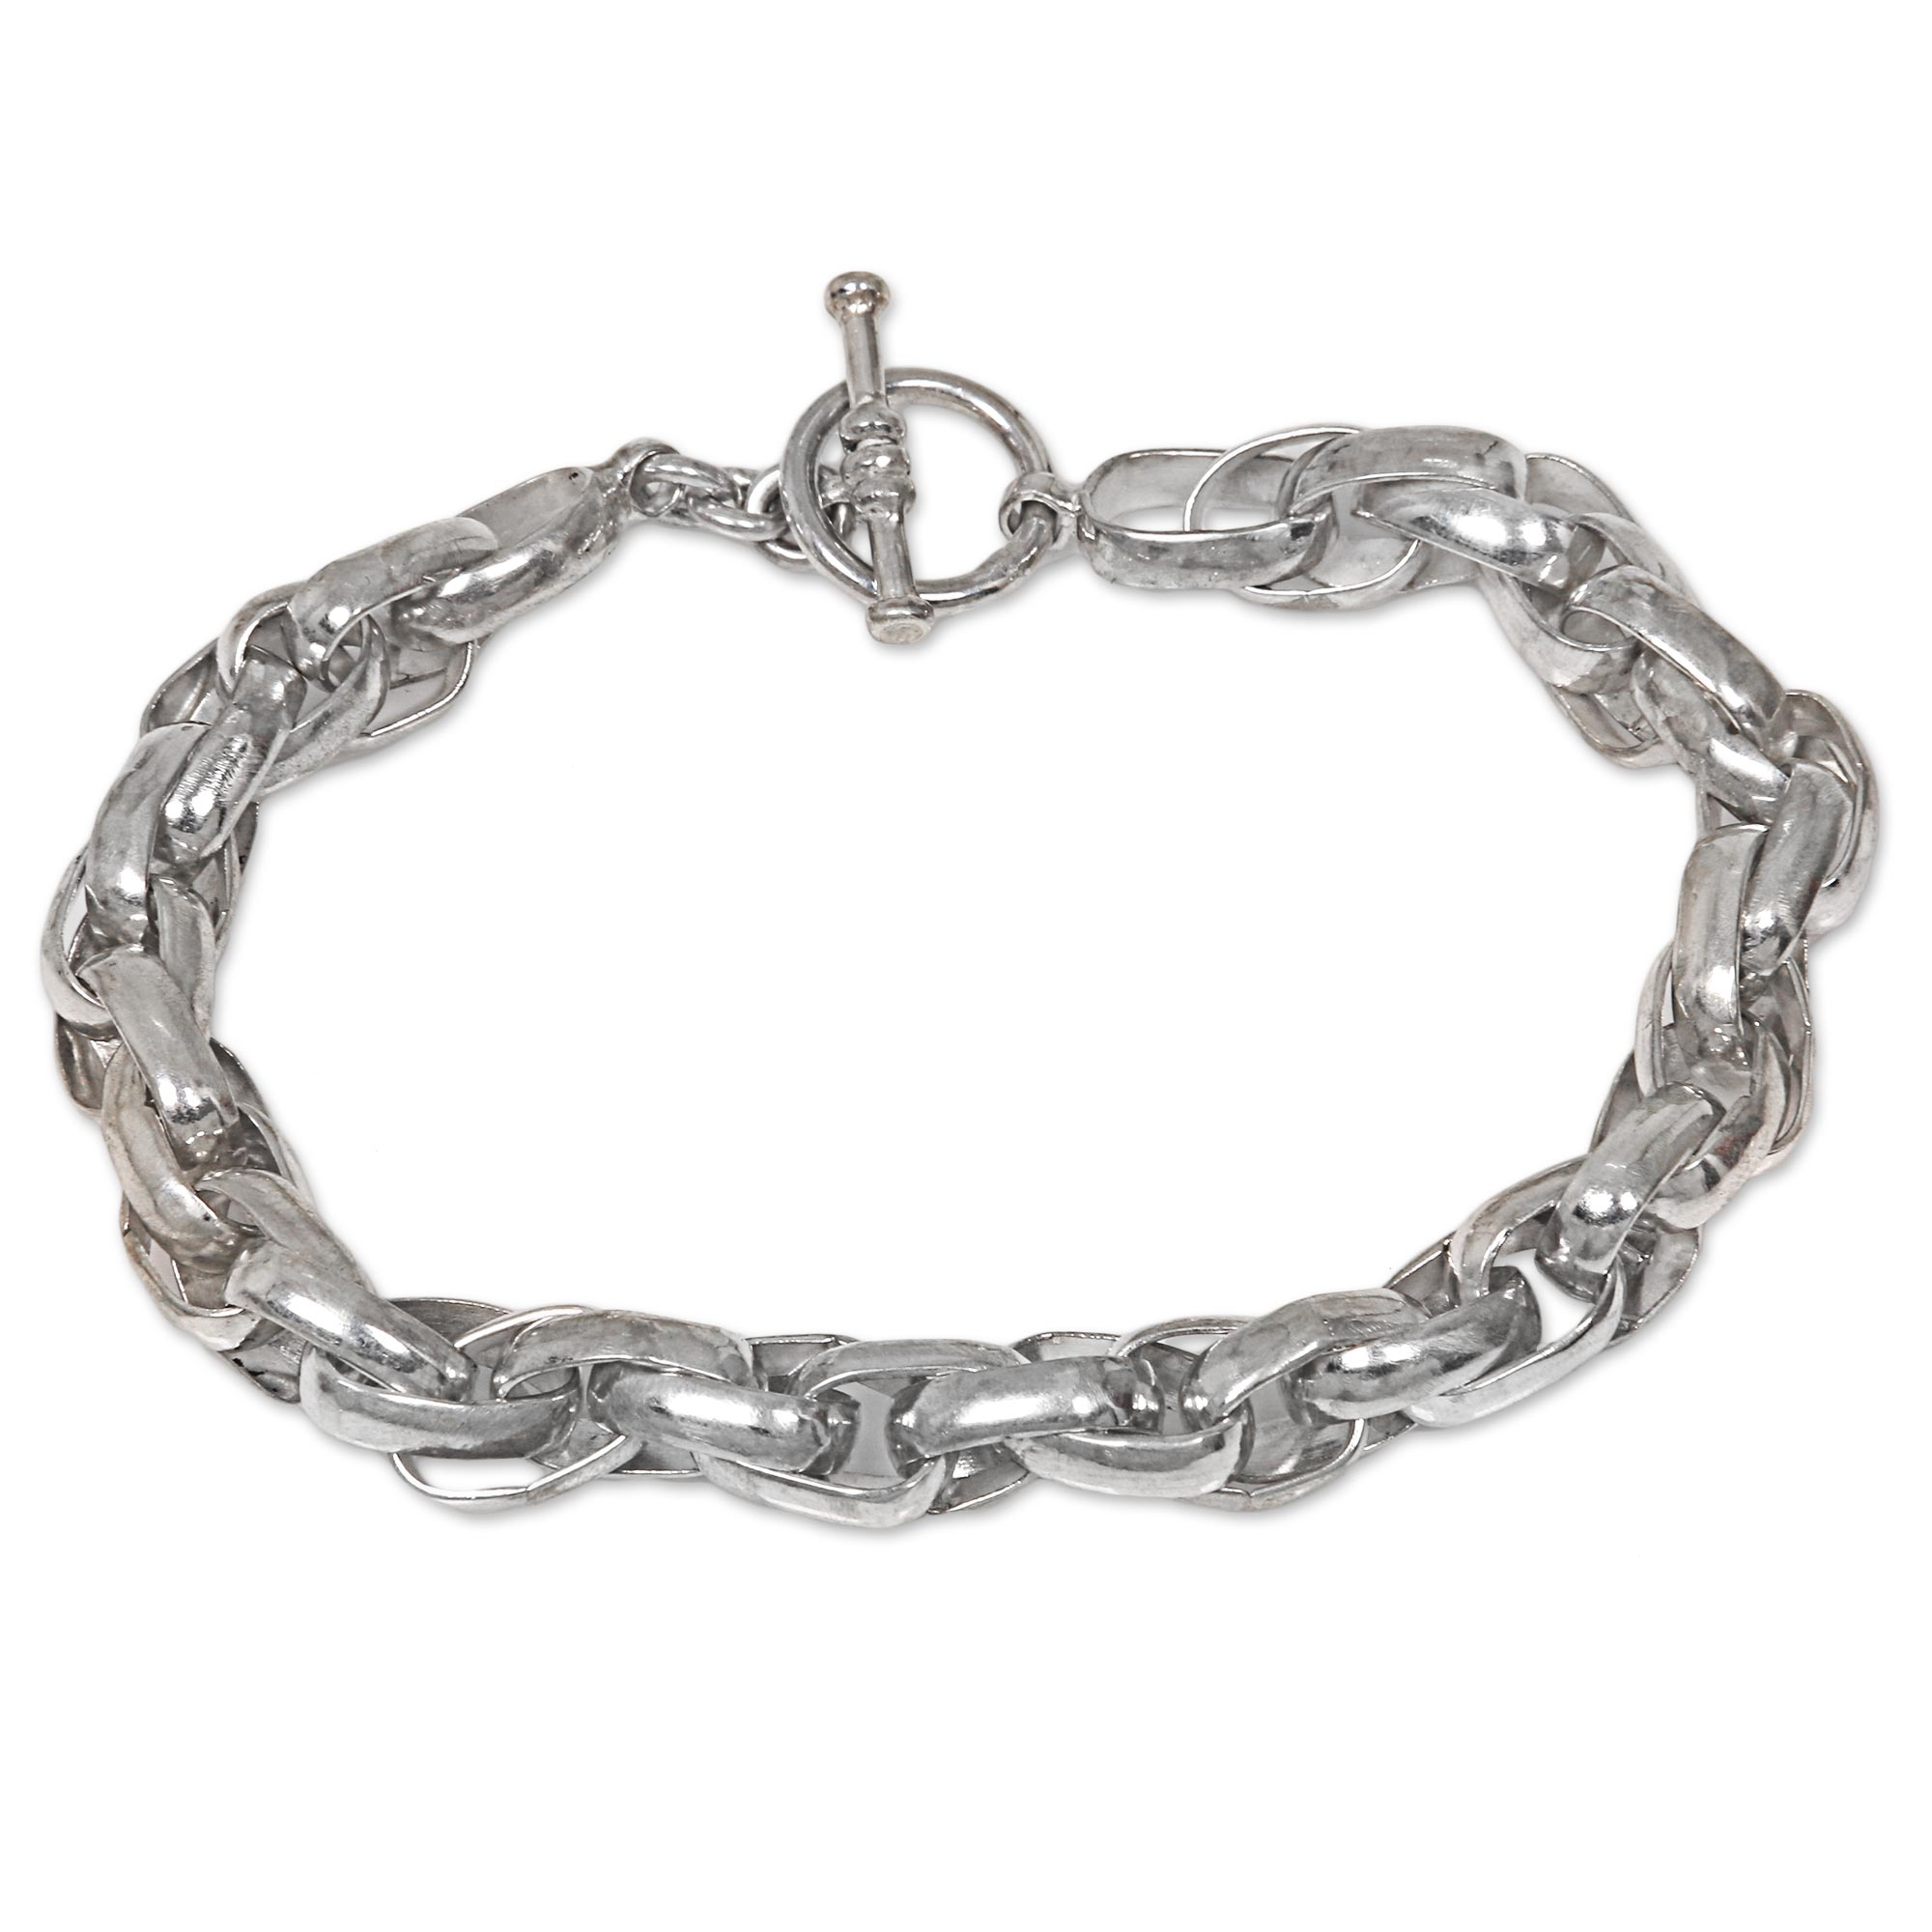 Hand Crafted Men's Sterling Silver Chain Bracelet from Bali - Overdrive ...